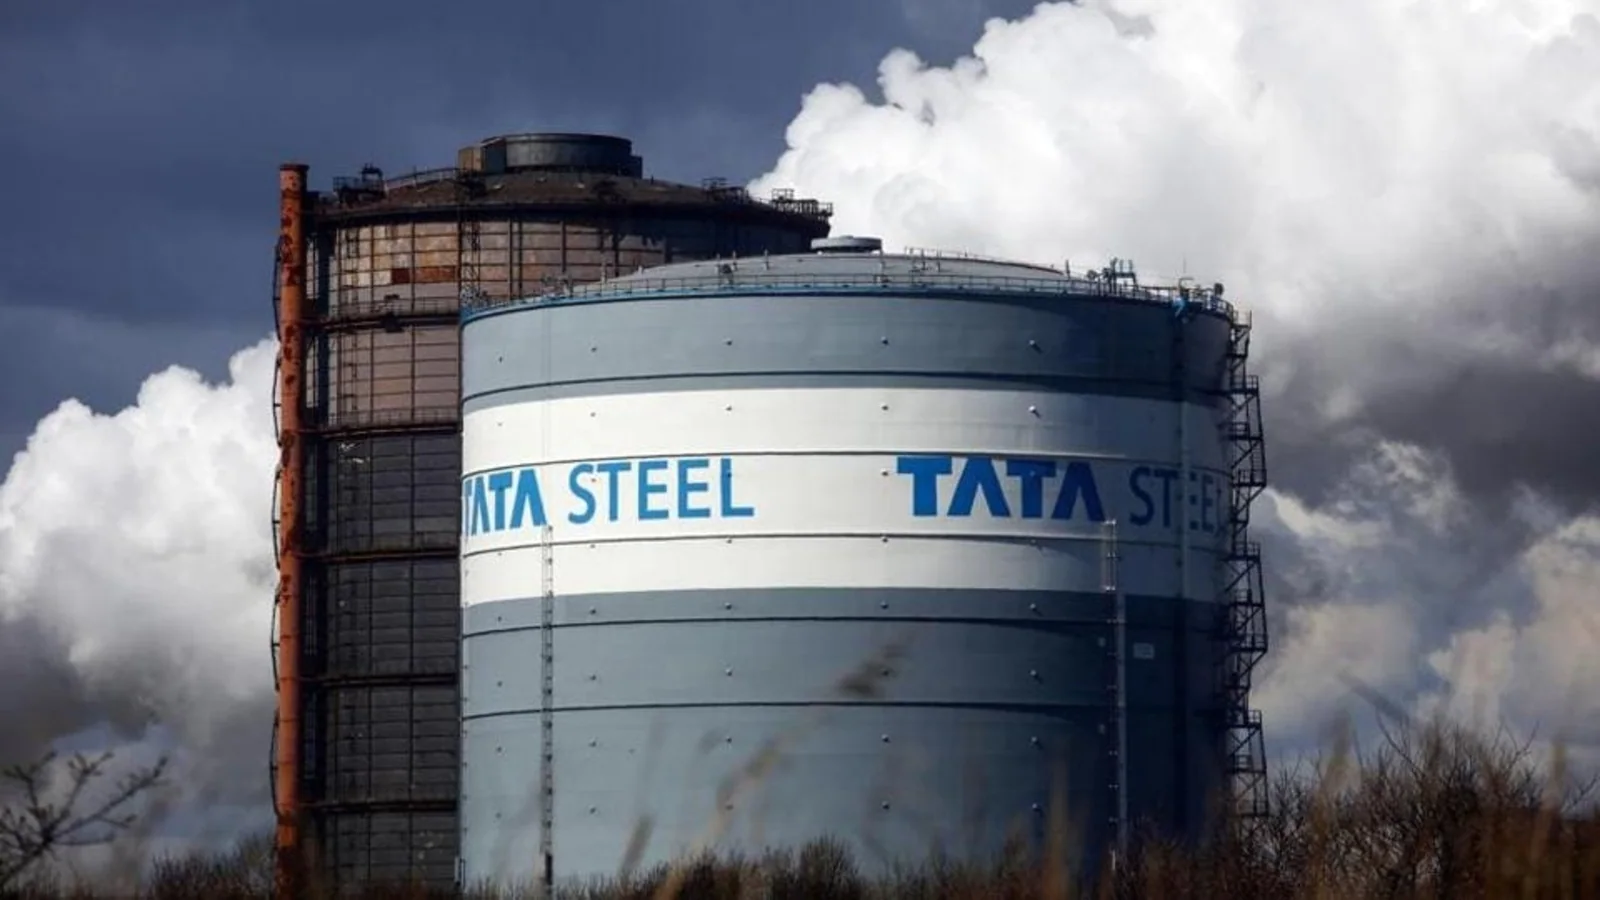 After Infosys, Tata Steel stops business with Russia over Ukraine invasion